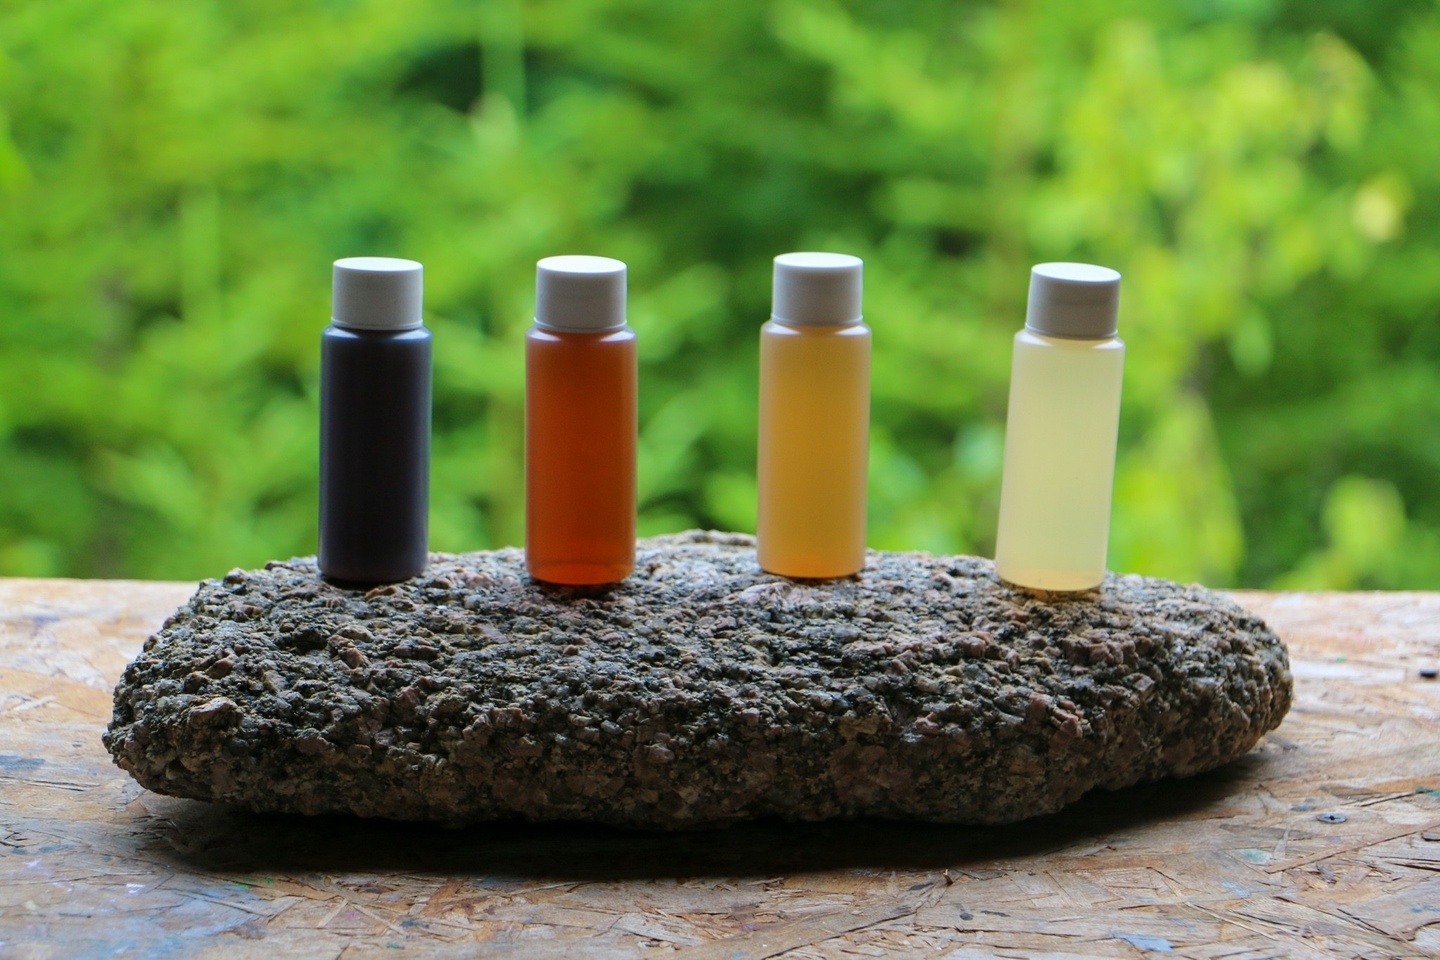 4 mini bottles of various shade of brown resting on a flat stone